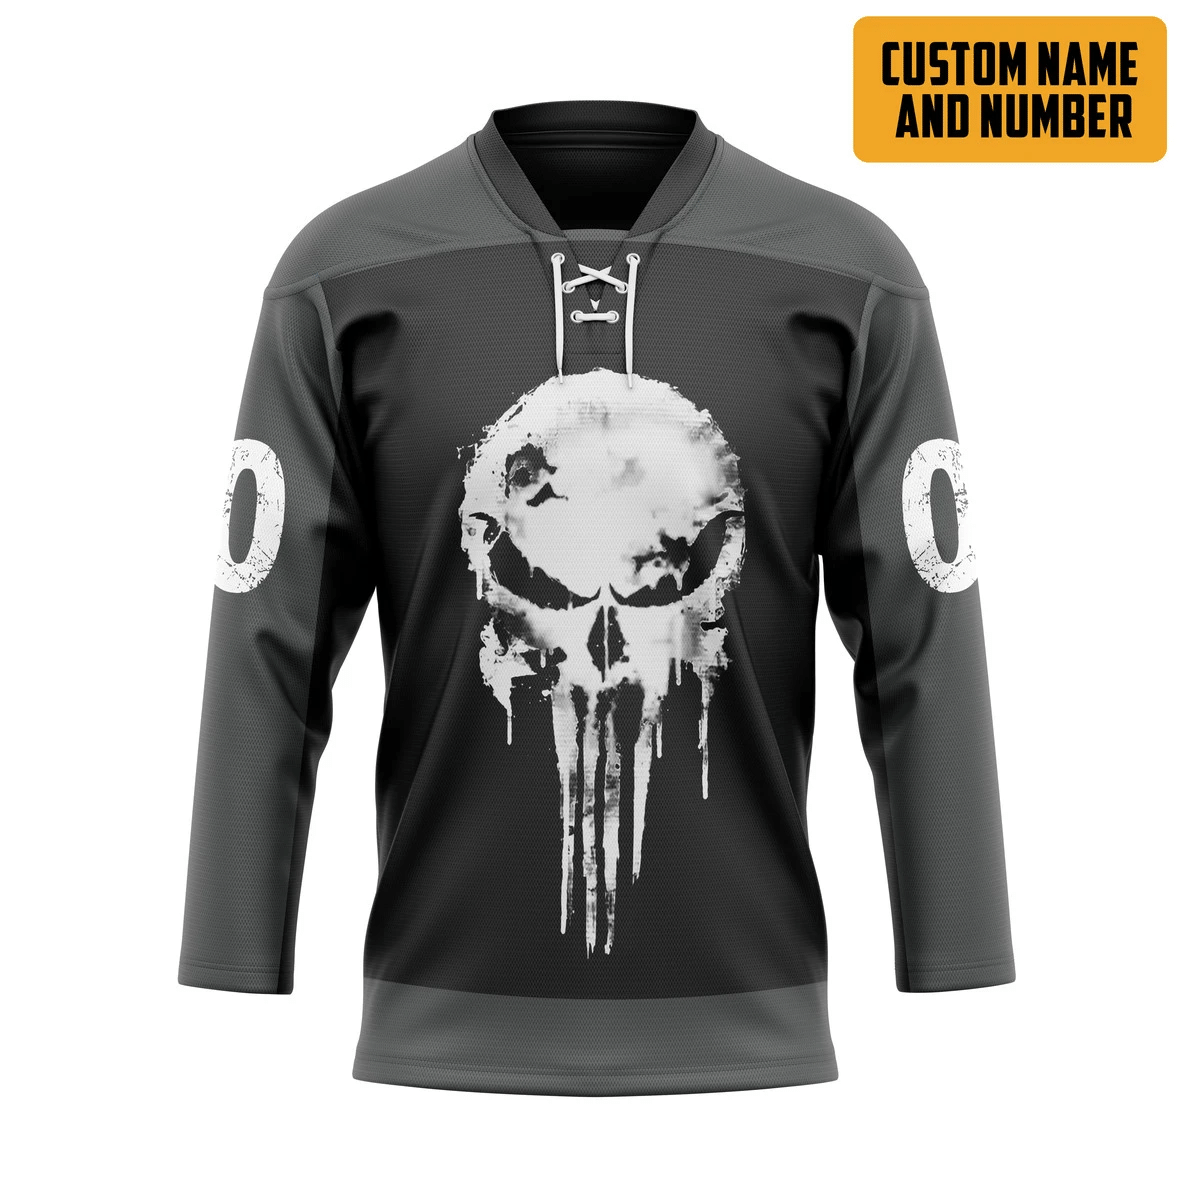 Top hot hockey jersey for NHL fans You can find out more at the bottom of the page! 151